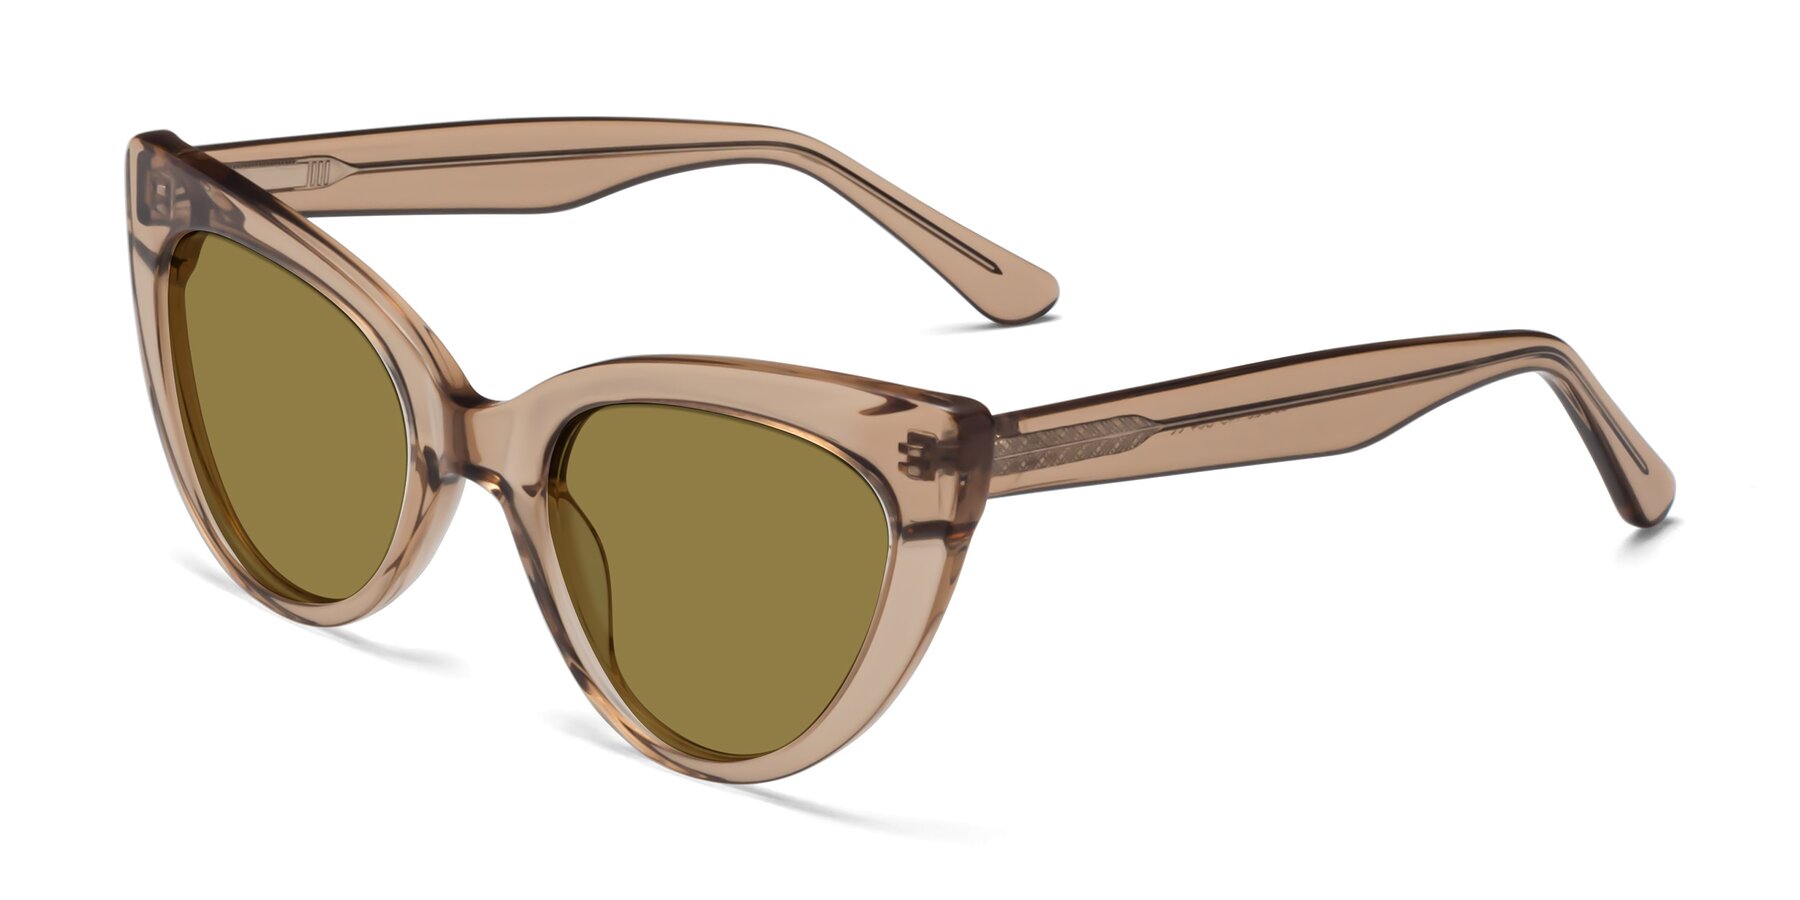 Angle of Tiesi in Caramel with Brown Polarized Lenses